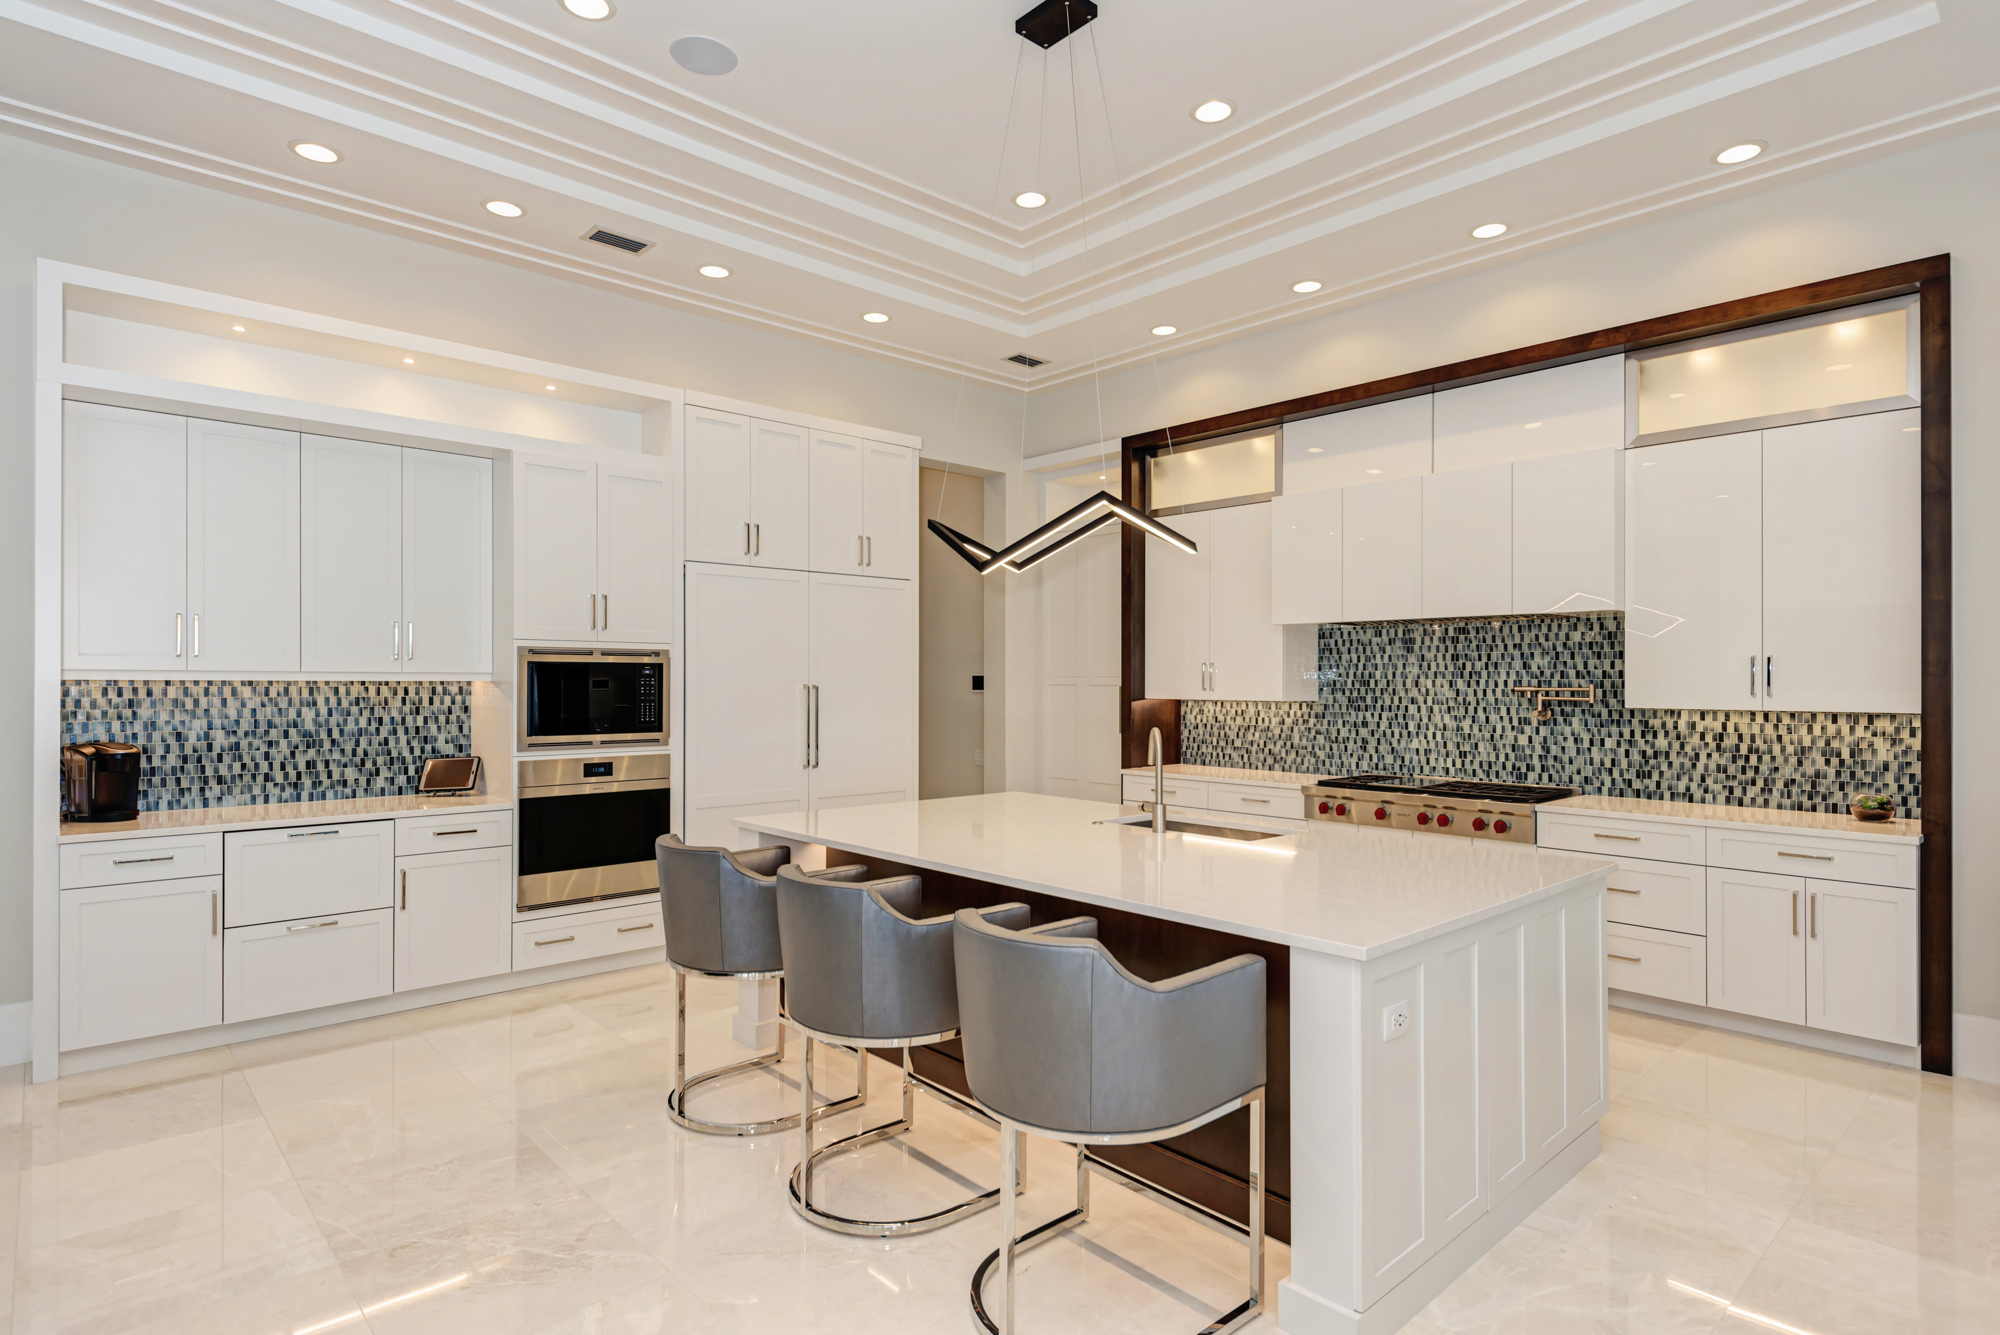 The kitchen features custom cabinetry and a large center island.